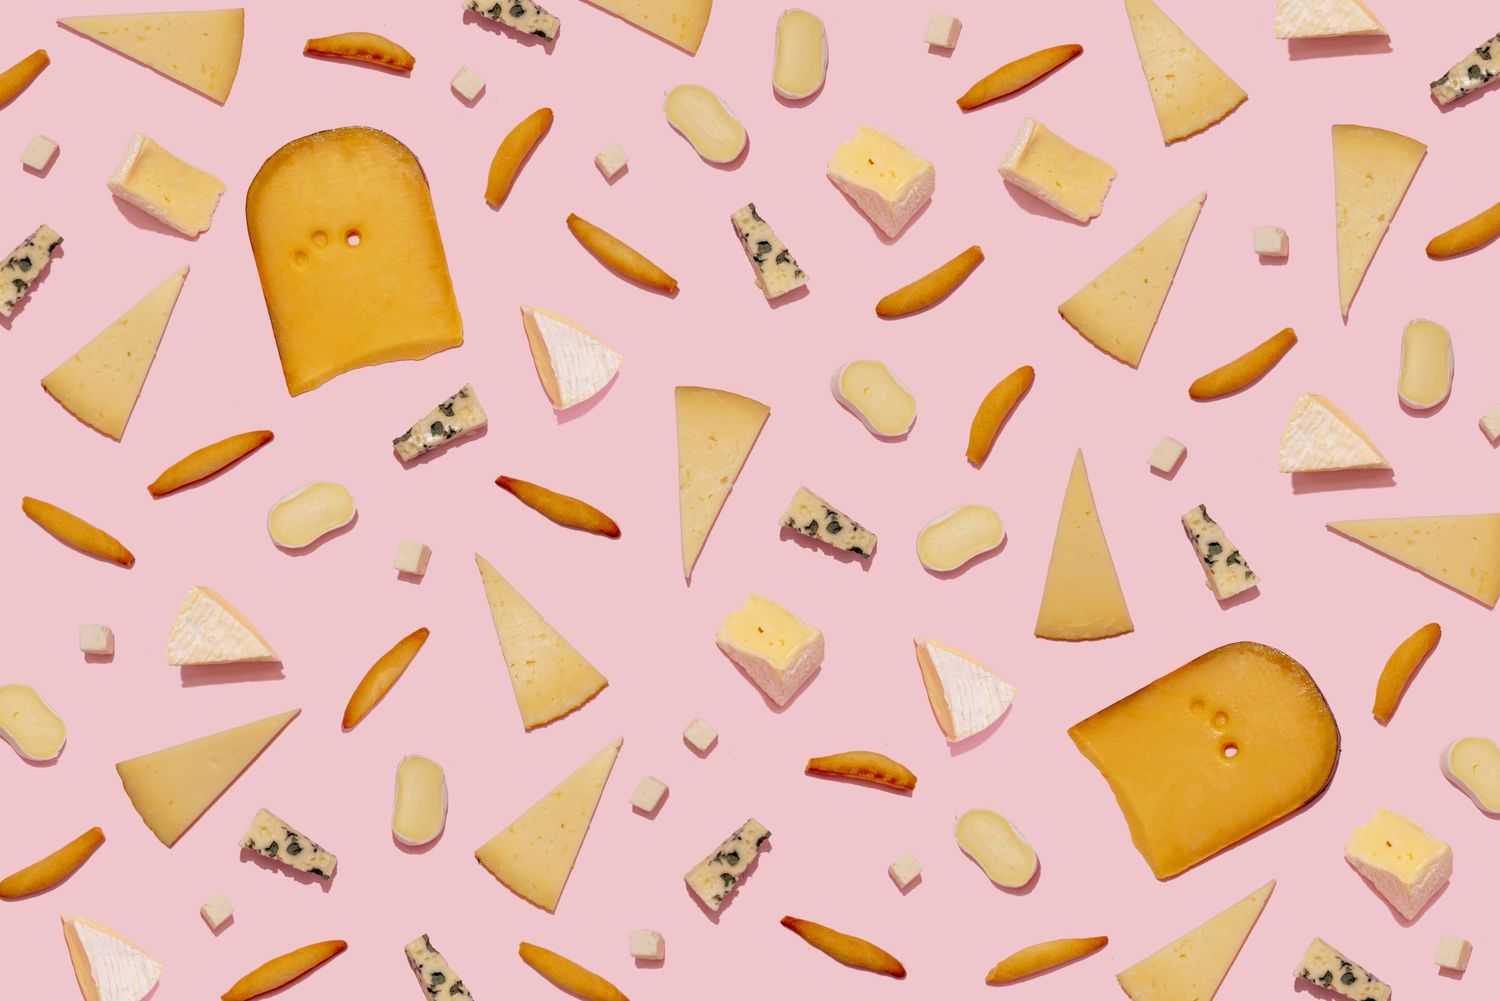 Varieties of cheese and bread sticks on pink background